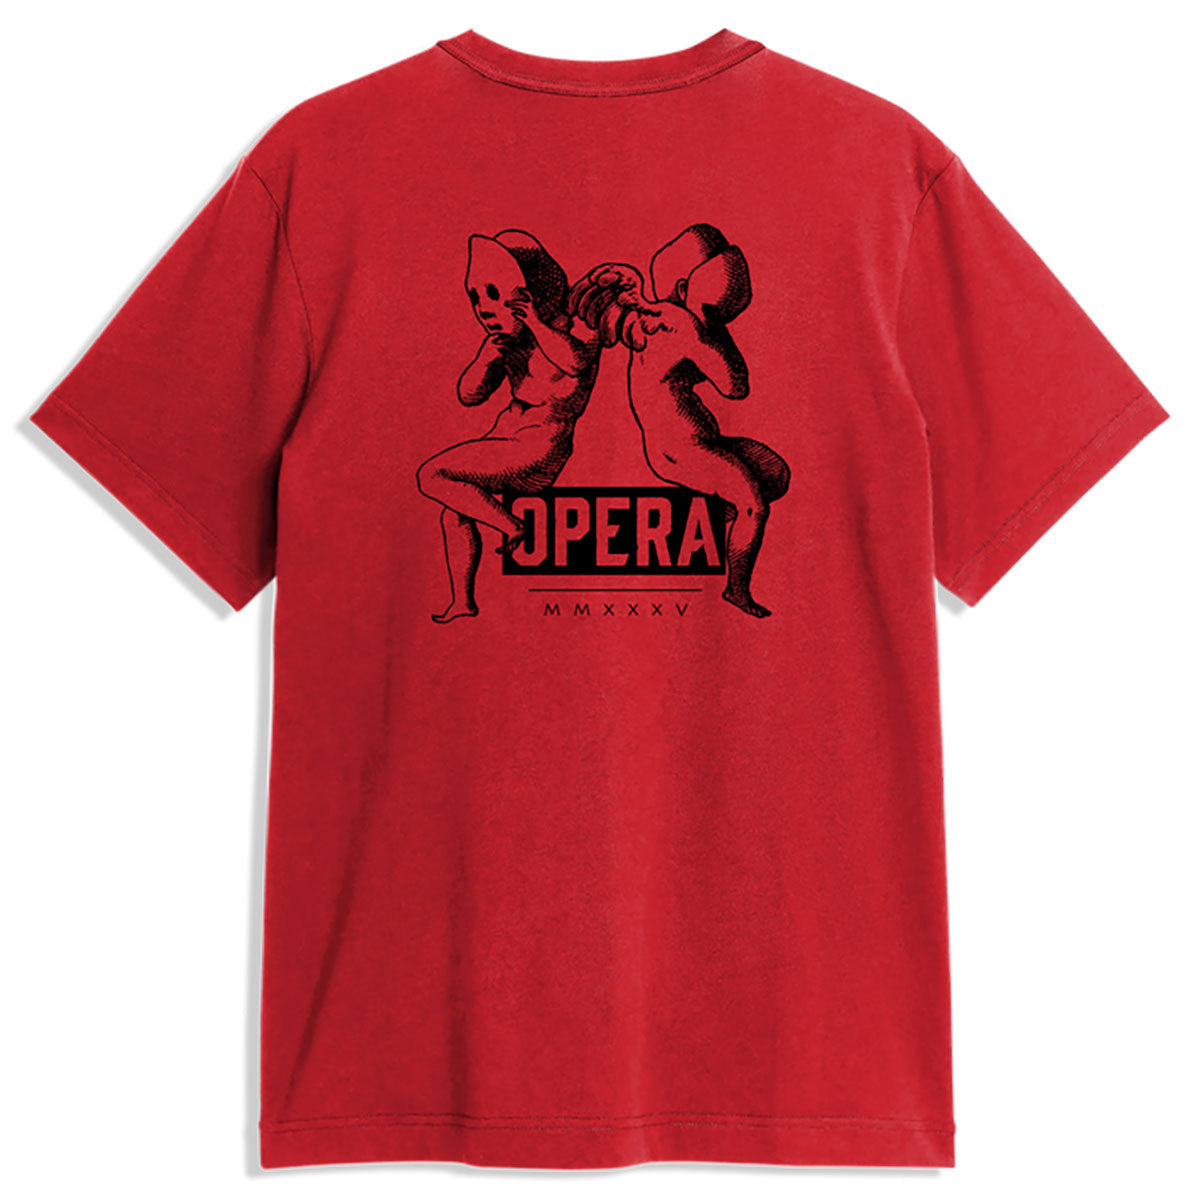 Opera Angels T-Shirt - Antique Cherry Red image 1